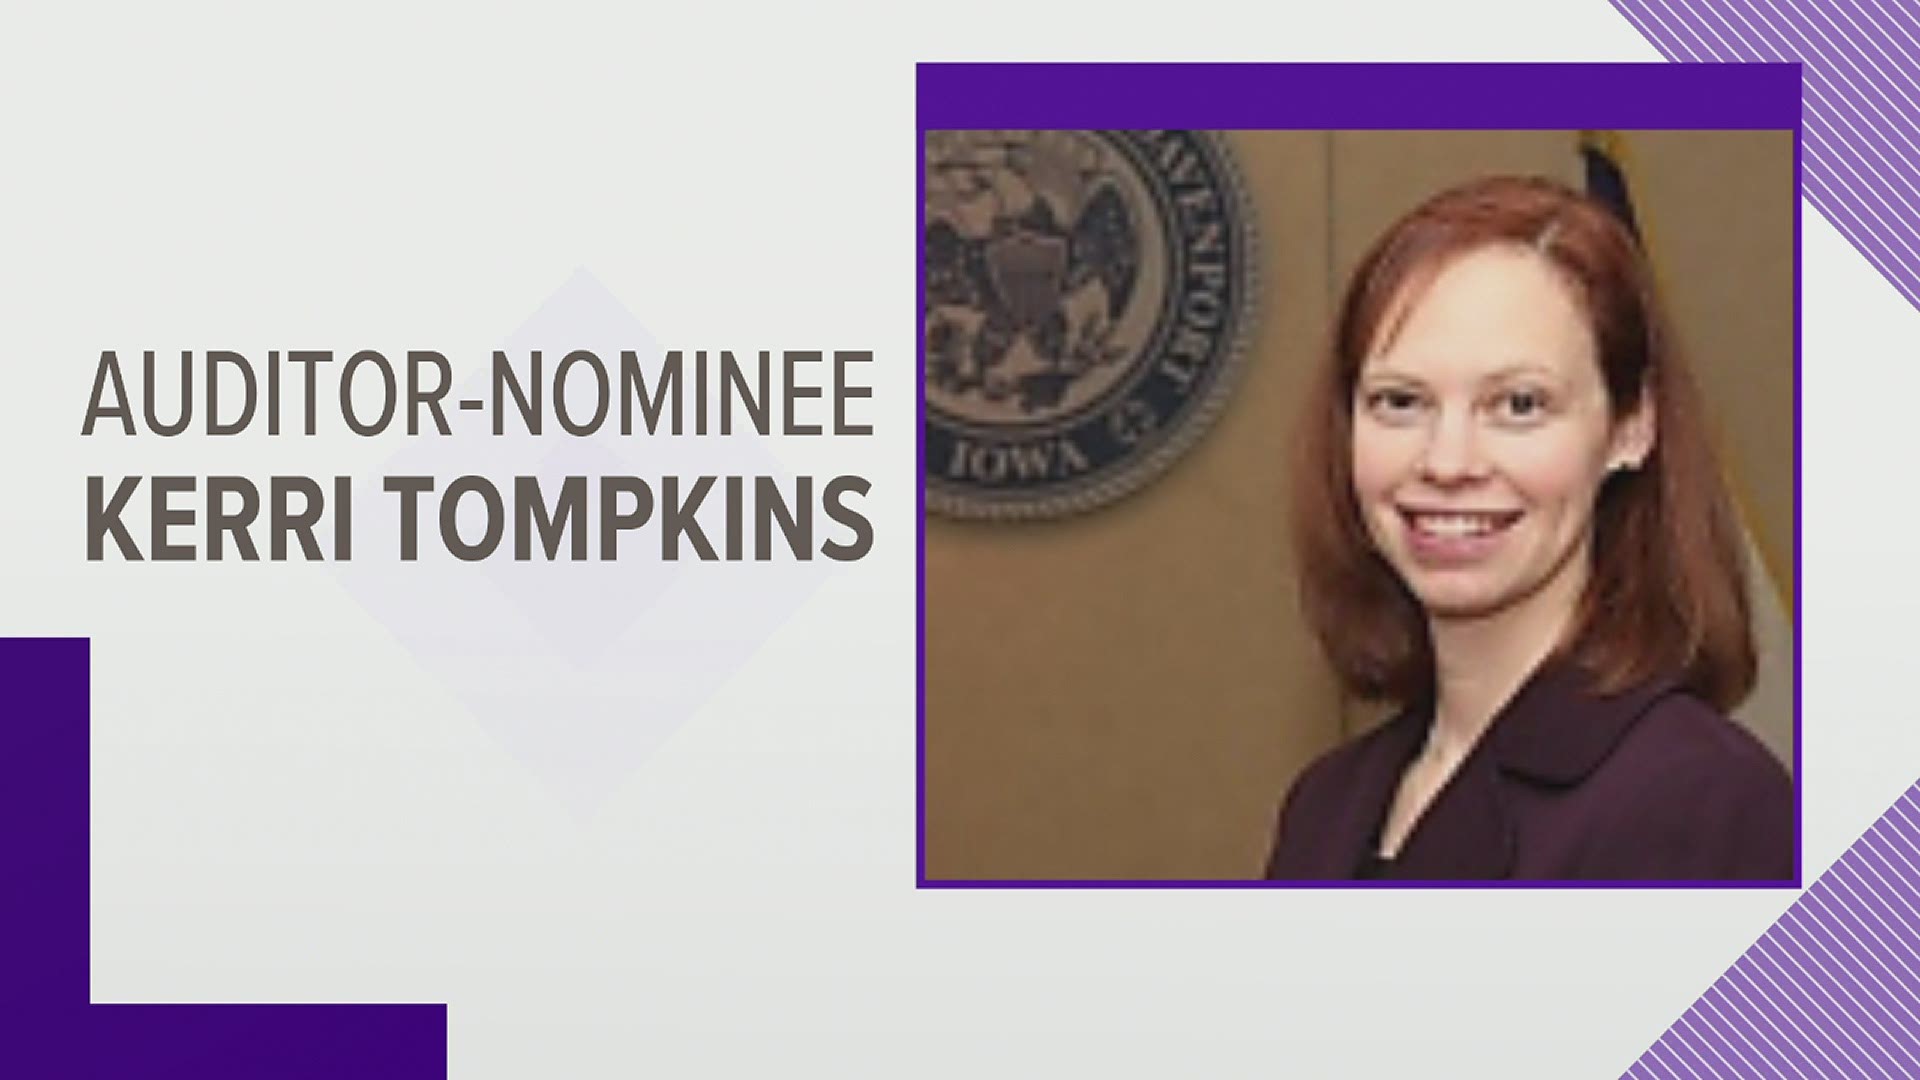 Tompkins was named and backed as the candidate by Board of Supervisors Chair Ken Beck the day before the Special Board Meeting vote.